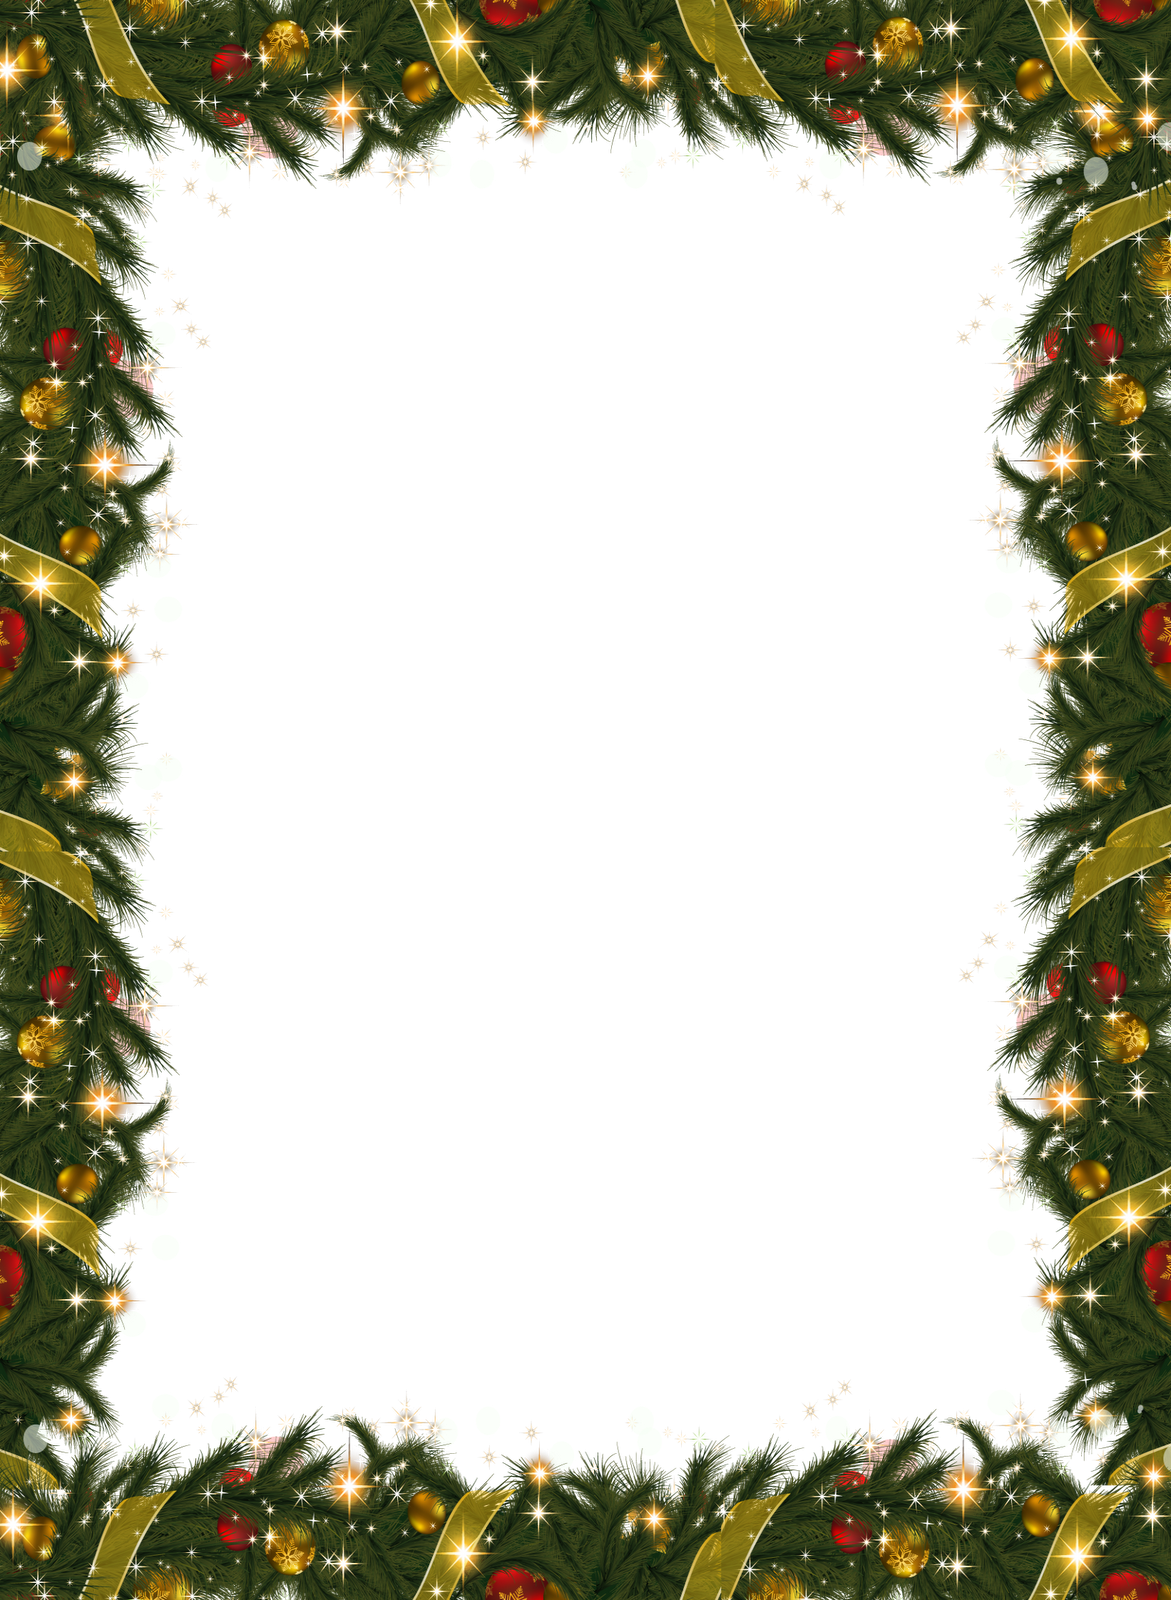 Collage Christmas Free HQ Image PNG Image